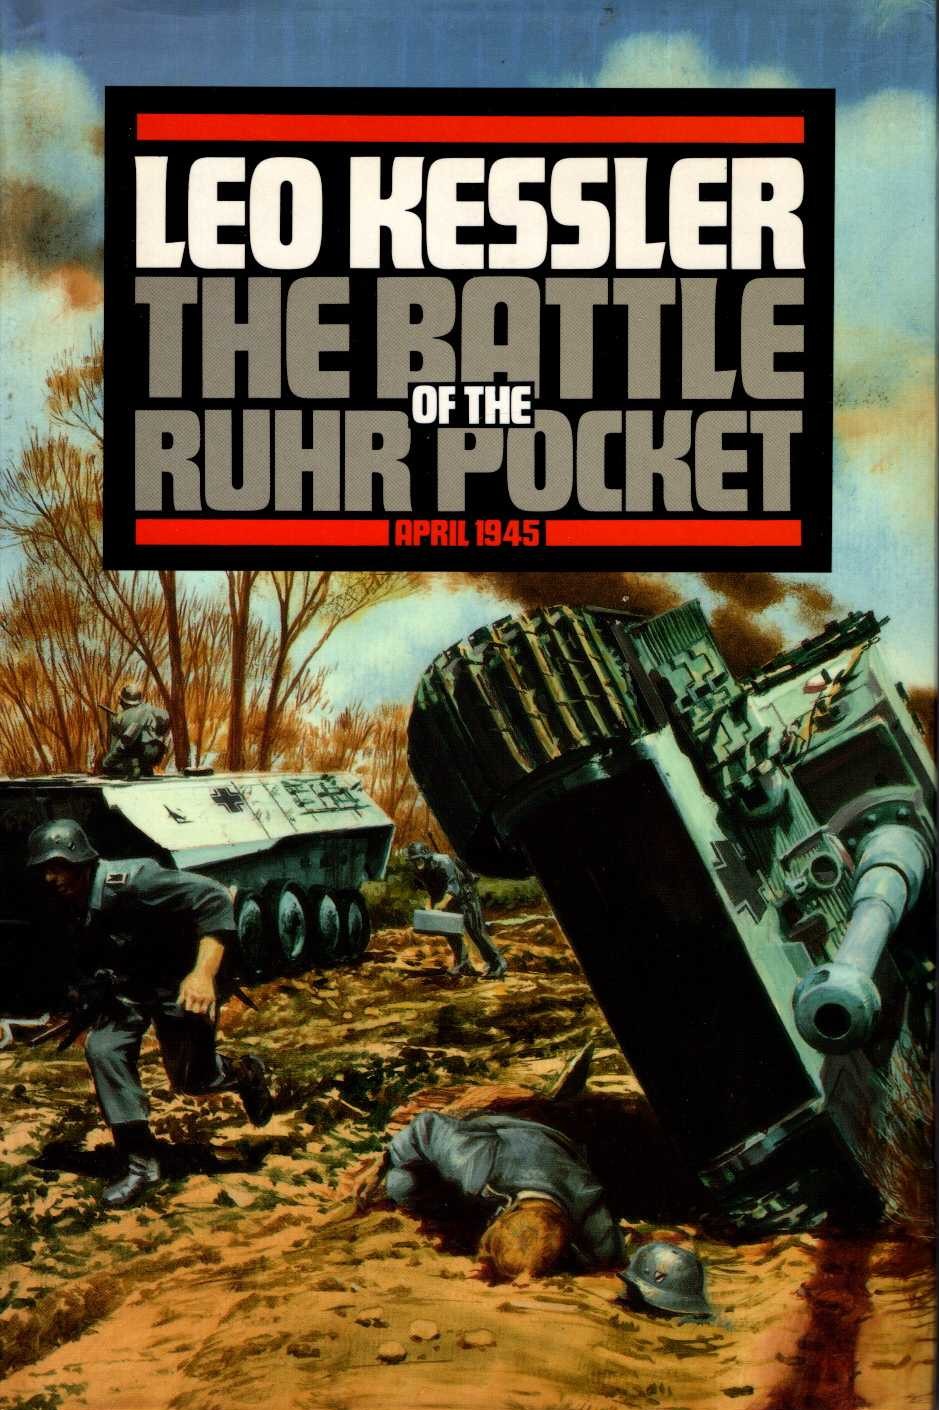 THE BATTLE OF THE RUHR POCKET. April 1945 front book cover image